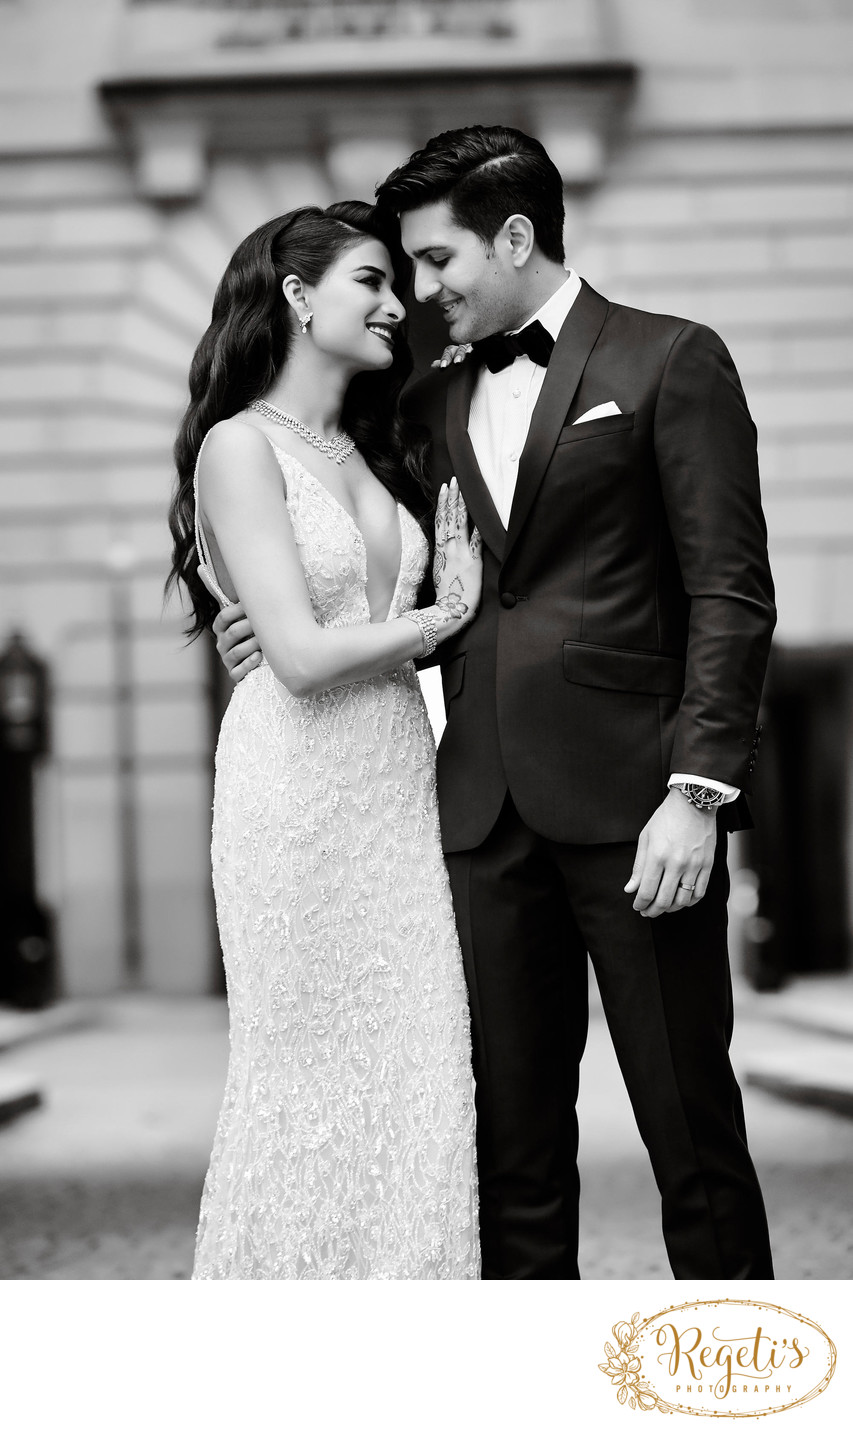 Bride and Groom in Black & White at Andrew Mellon Auditorium in DC